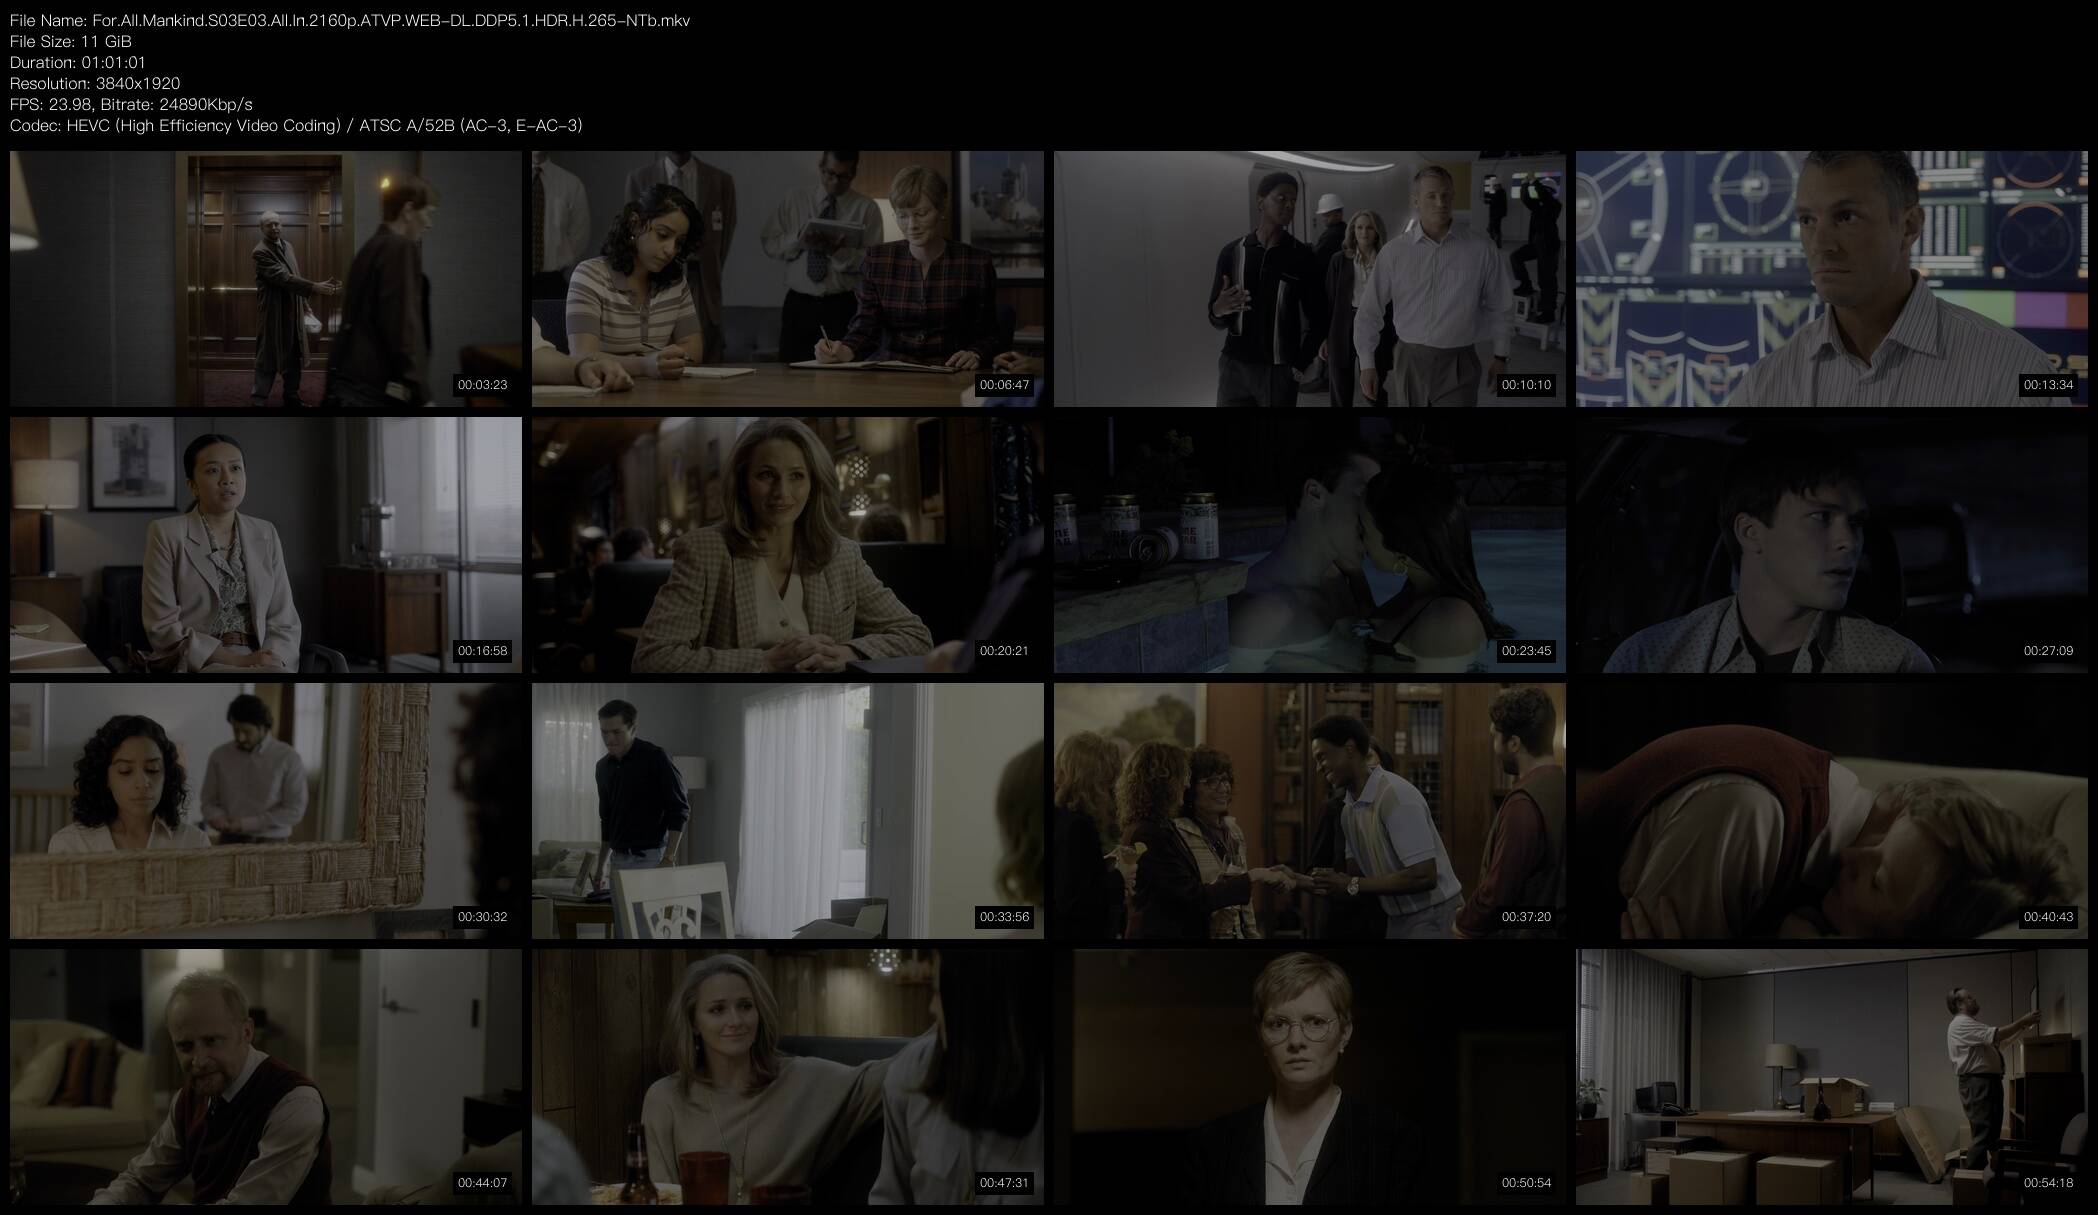 For_All_Mankind_S03E03_All_In_2160p_ATVP_WEB-DL_DDP5_1_HDR_H_265-NTb_mkv__vthumb_.jpg